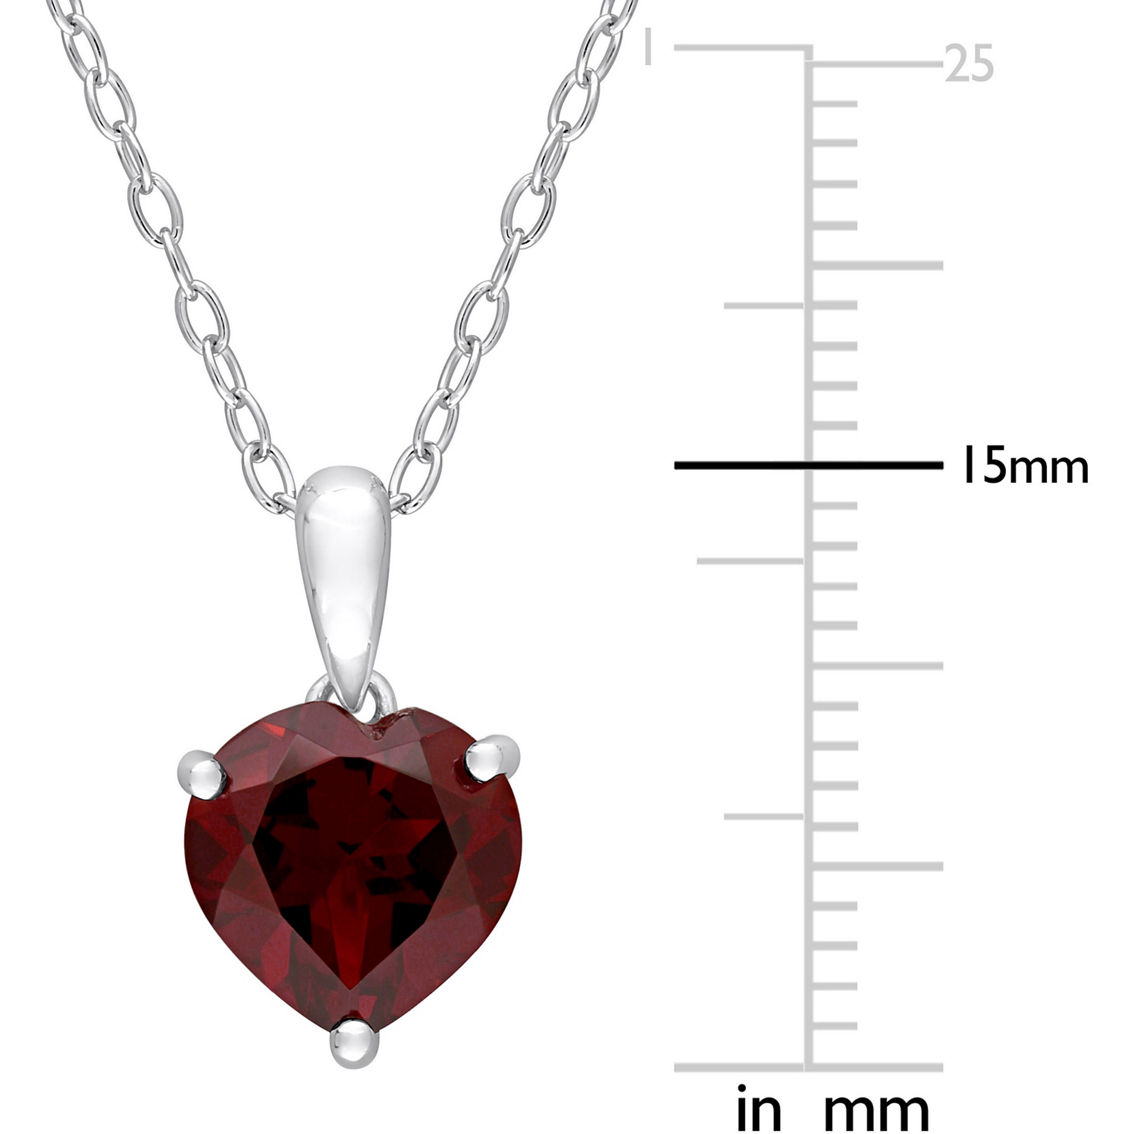 Sofia B. Sterling Silver Heart Shaped Garnet Pendant and Stud Earring 2 pc. Set - Image 4 of 4